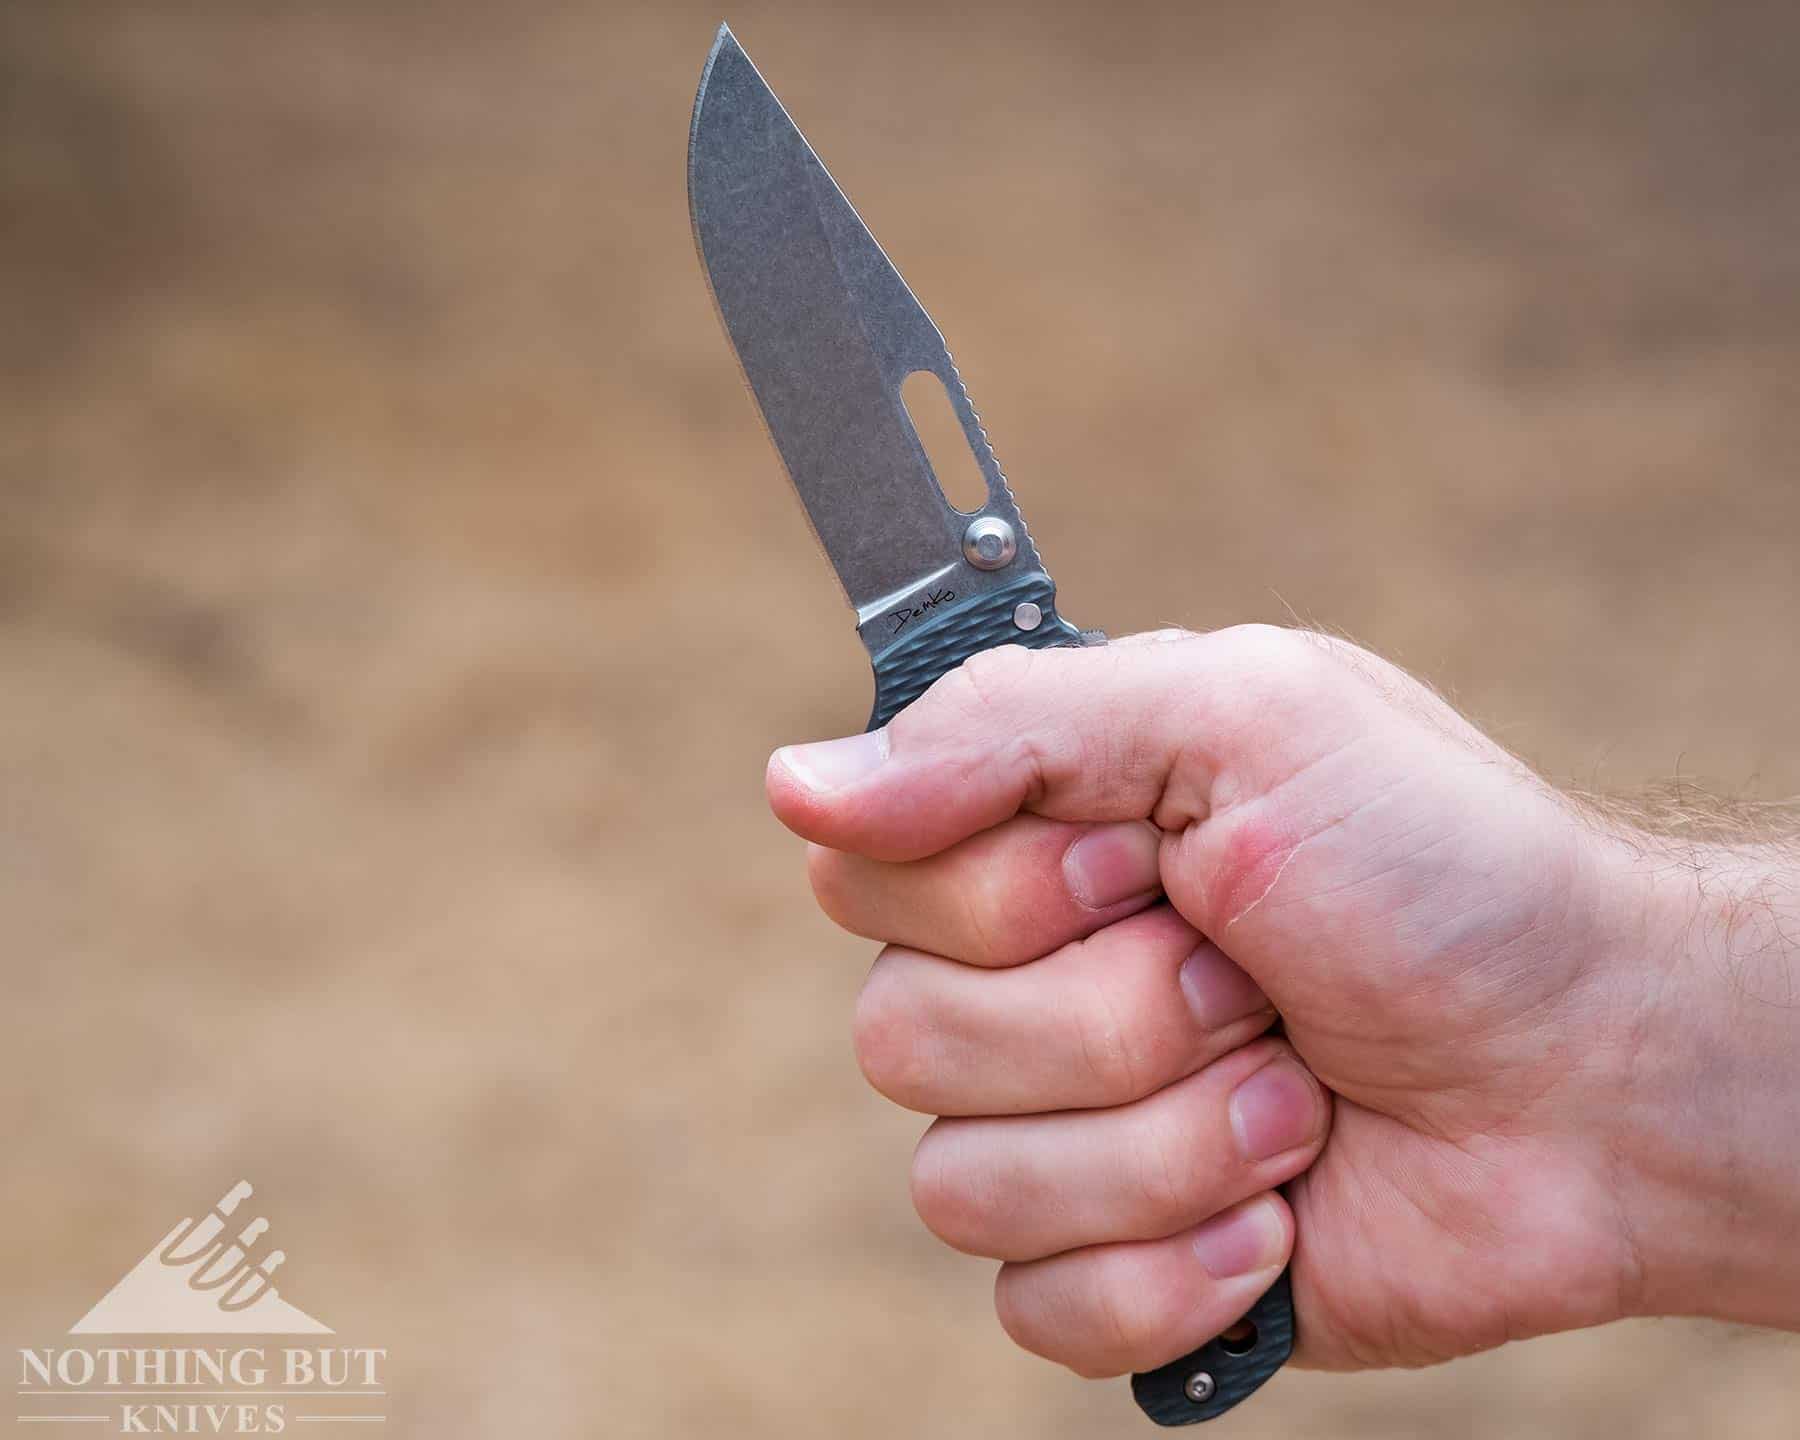 The AD 20.5 Pocket Knife has a grippy handle with good ergonomics. 